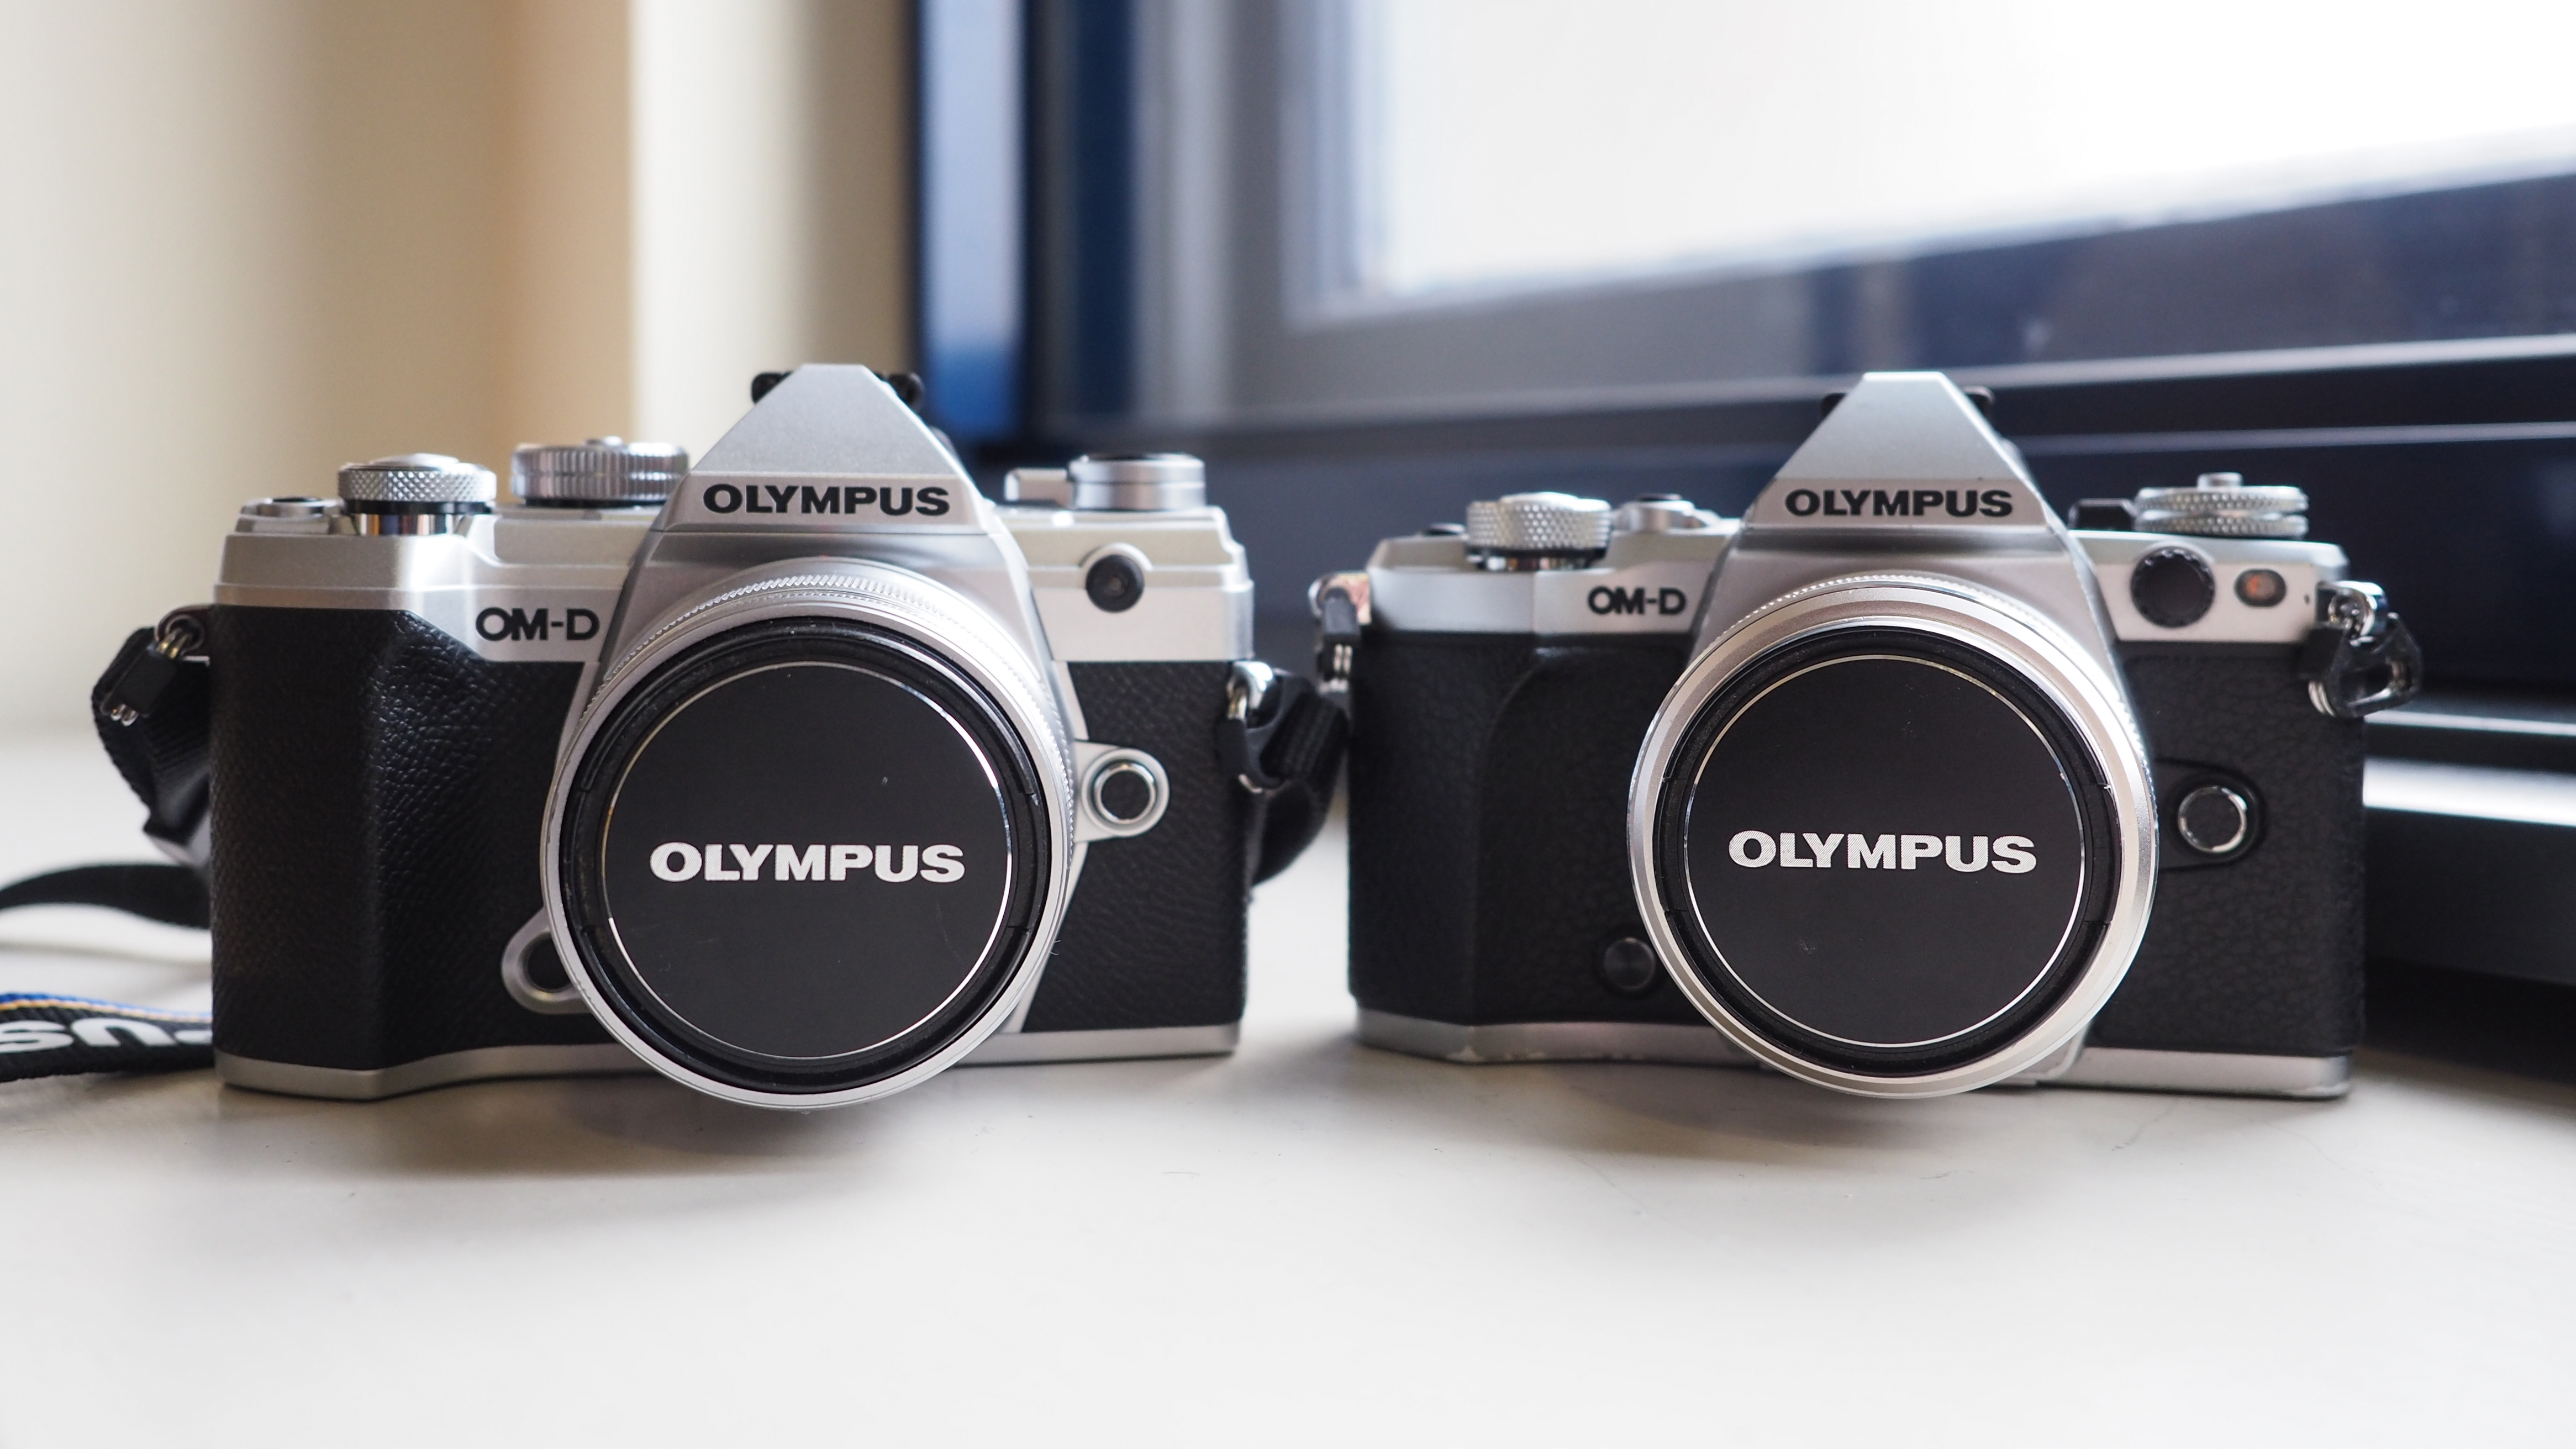 The Olympus OM-D E-M5 Mark III is 2mm wider, 4mm deeper and 51g lighter than the Mark II